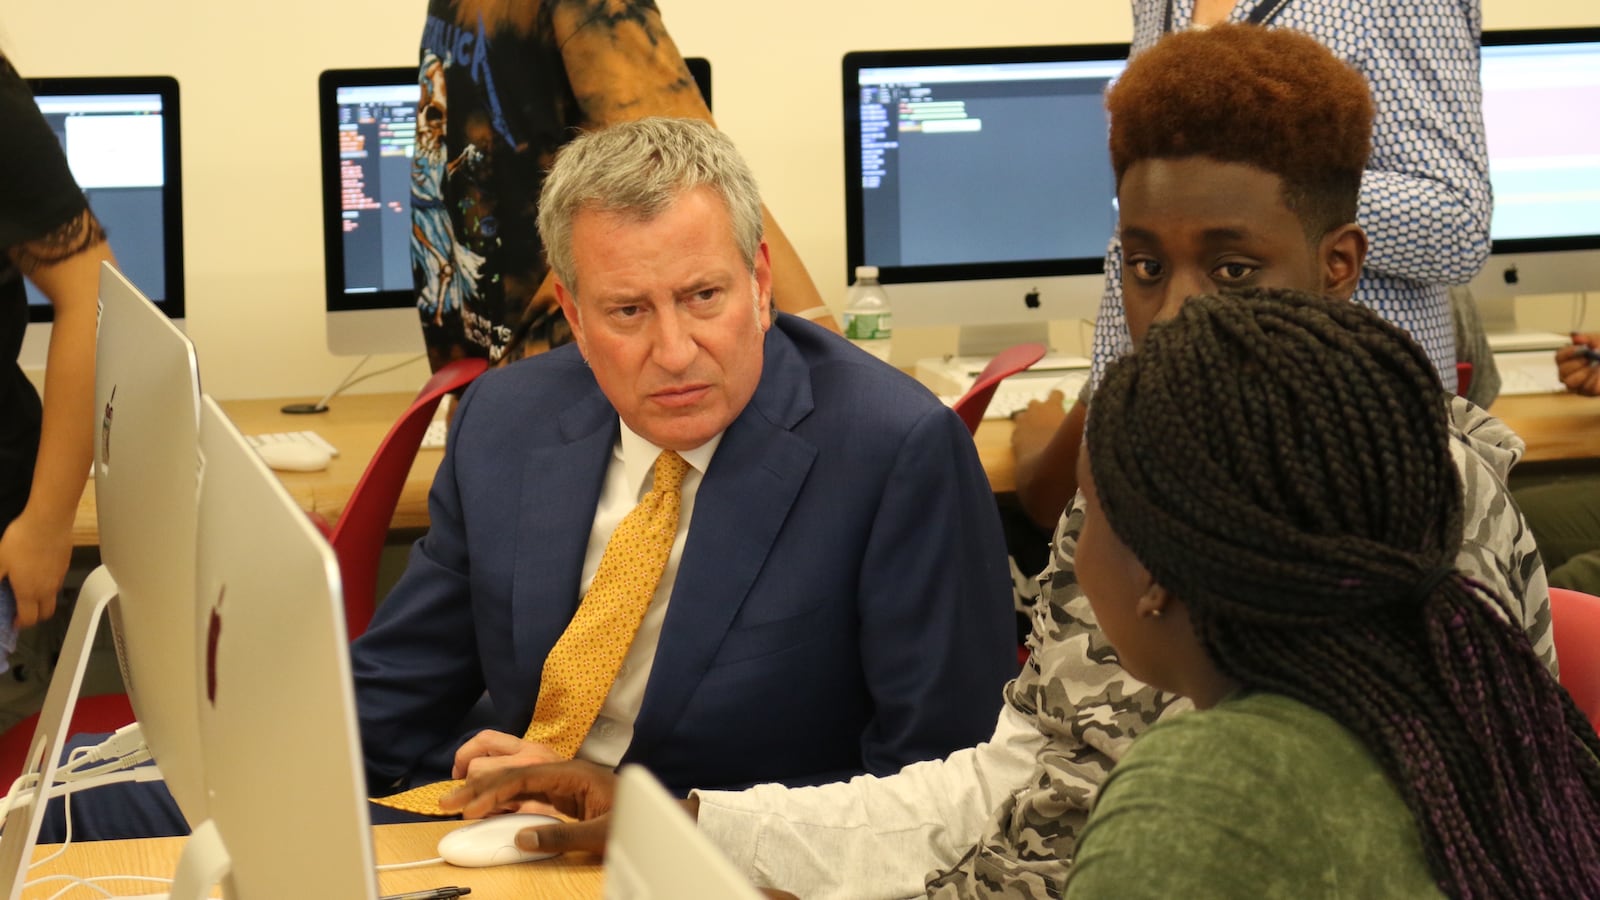 Mayor Bill de Blasio released a school diversity plan that calls on a working group to come up with additional ways to encourage integration.